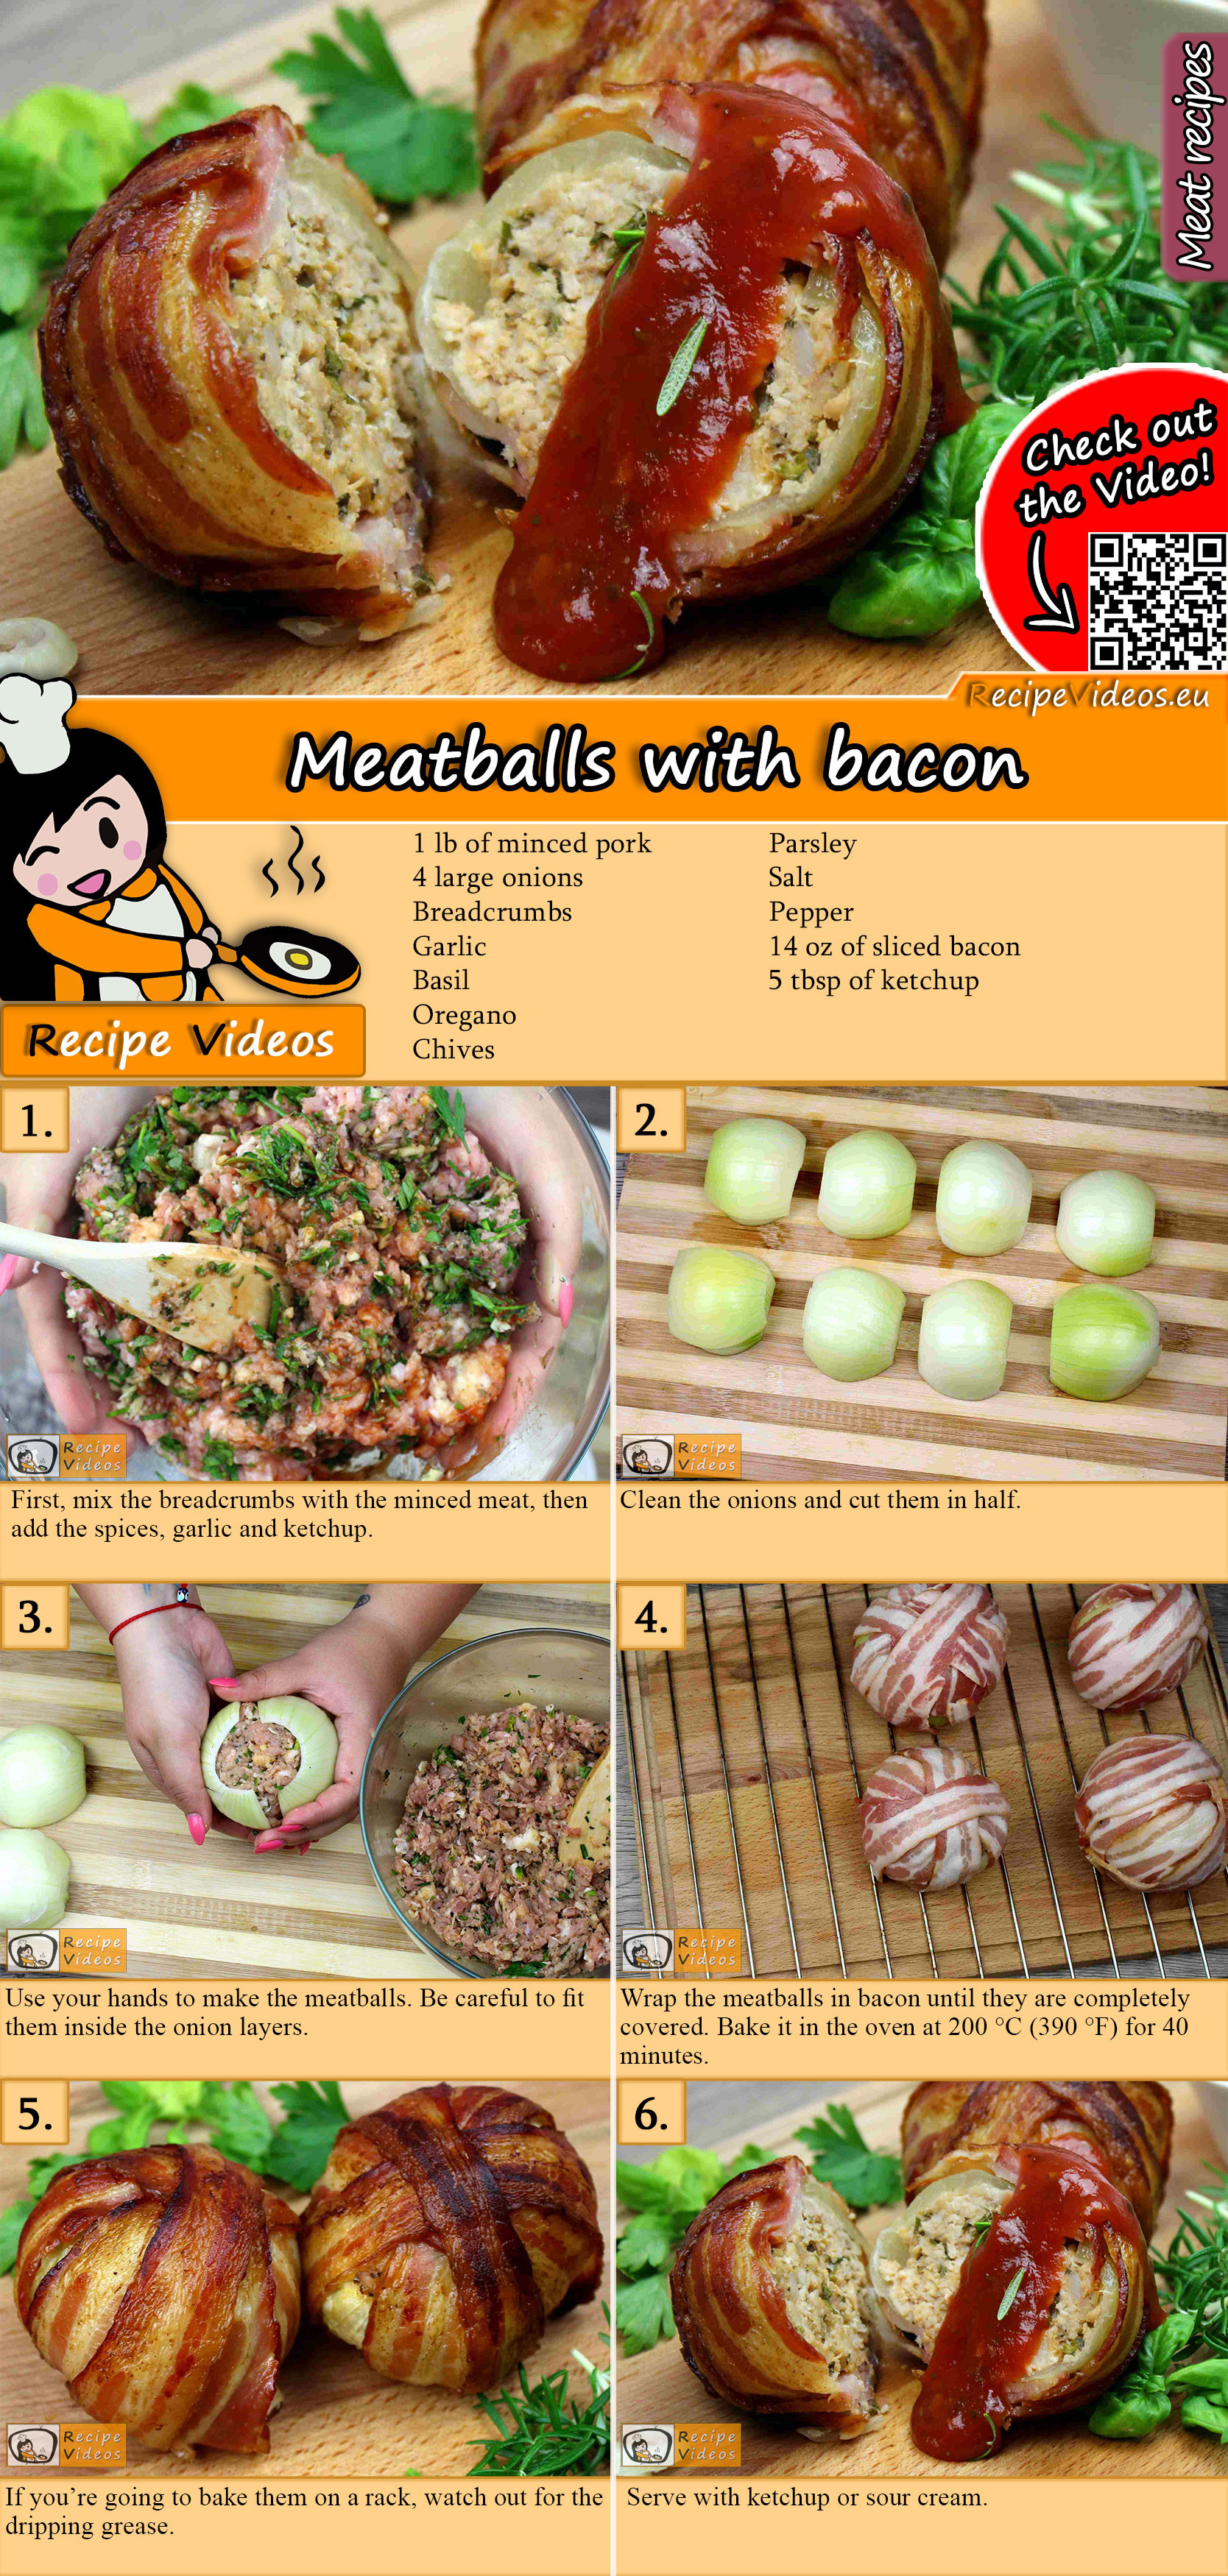 Meatballs with bacon recipe with video